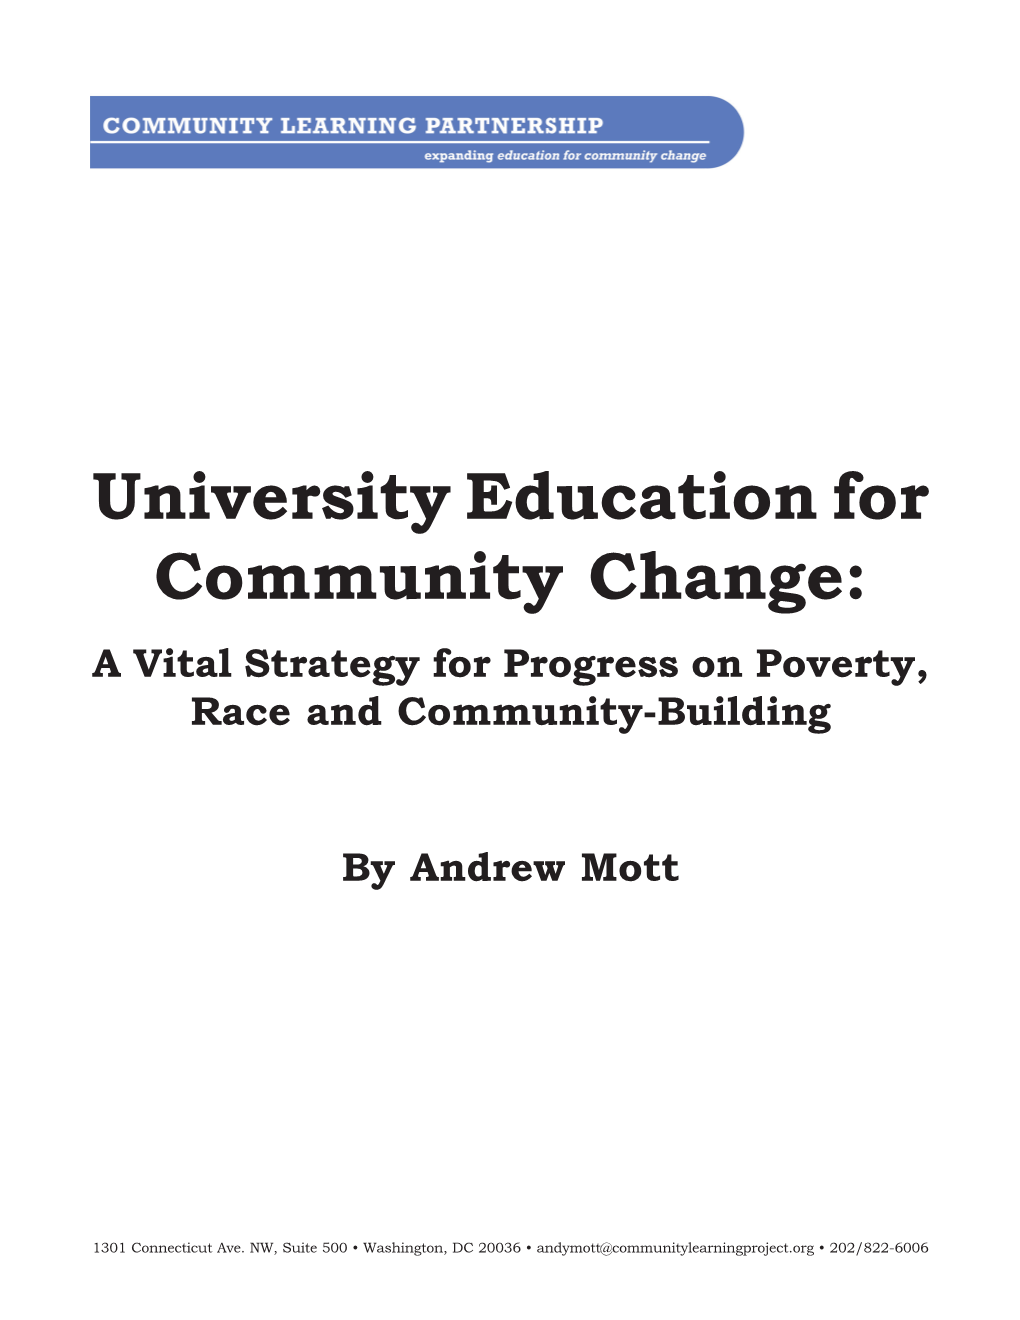 University Education for Community Change: a Vital Strategy for Progress on Poverty, Race and Community-Building